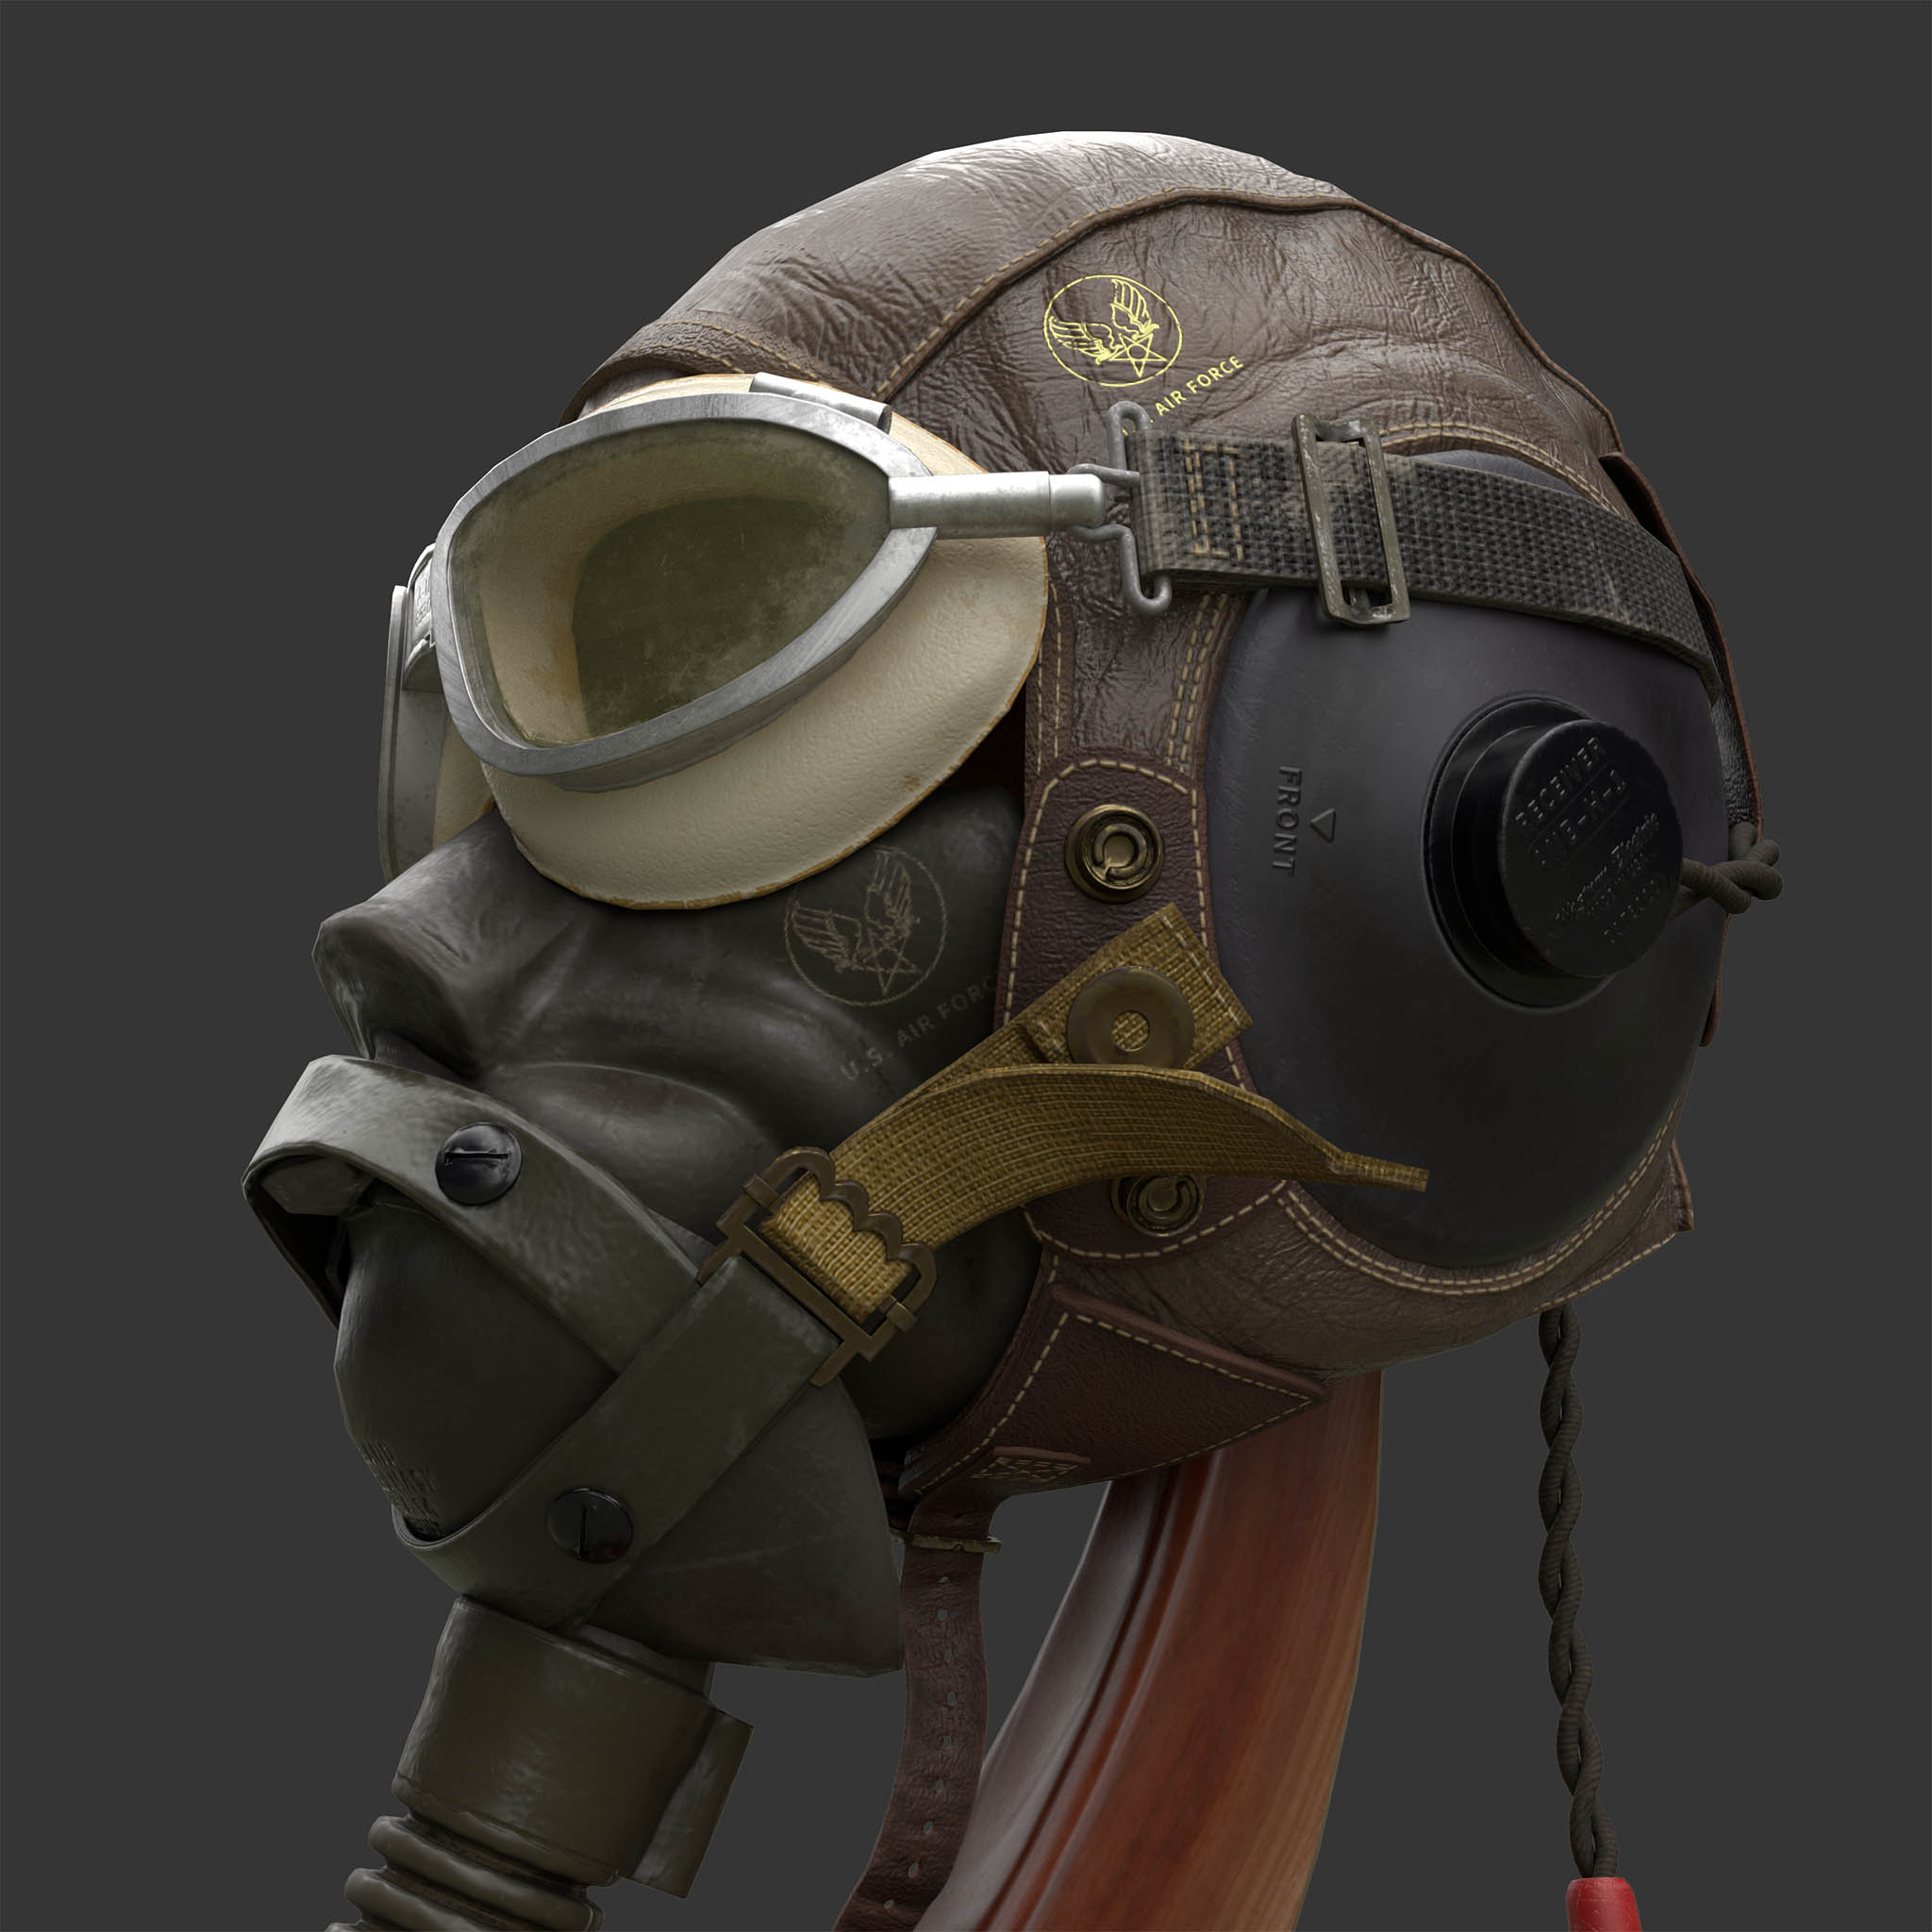 A close-up render of the WWII flight helmet showing details of the leather, plastic, and cloth materials present in the helmet as well as find embossed insignias which show the asset has good texel density